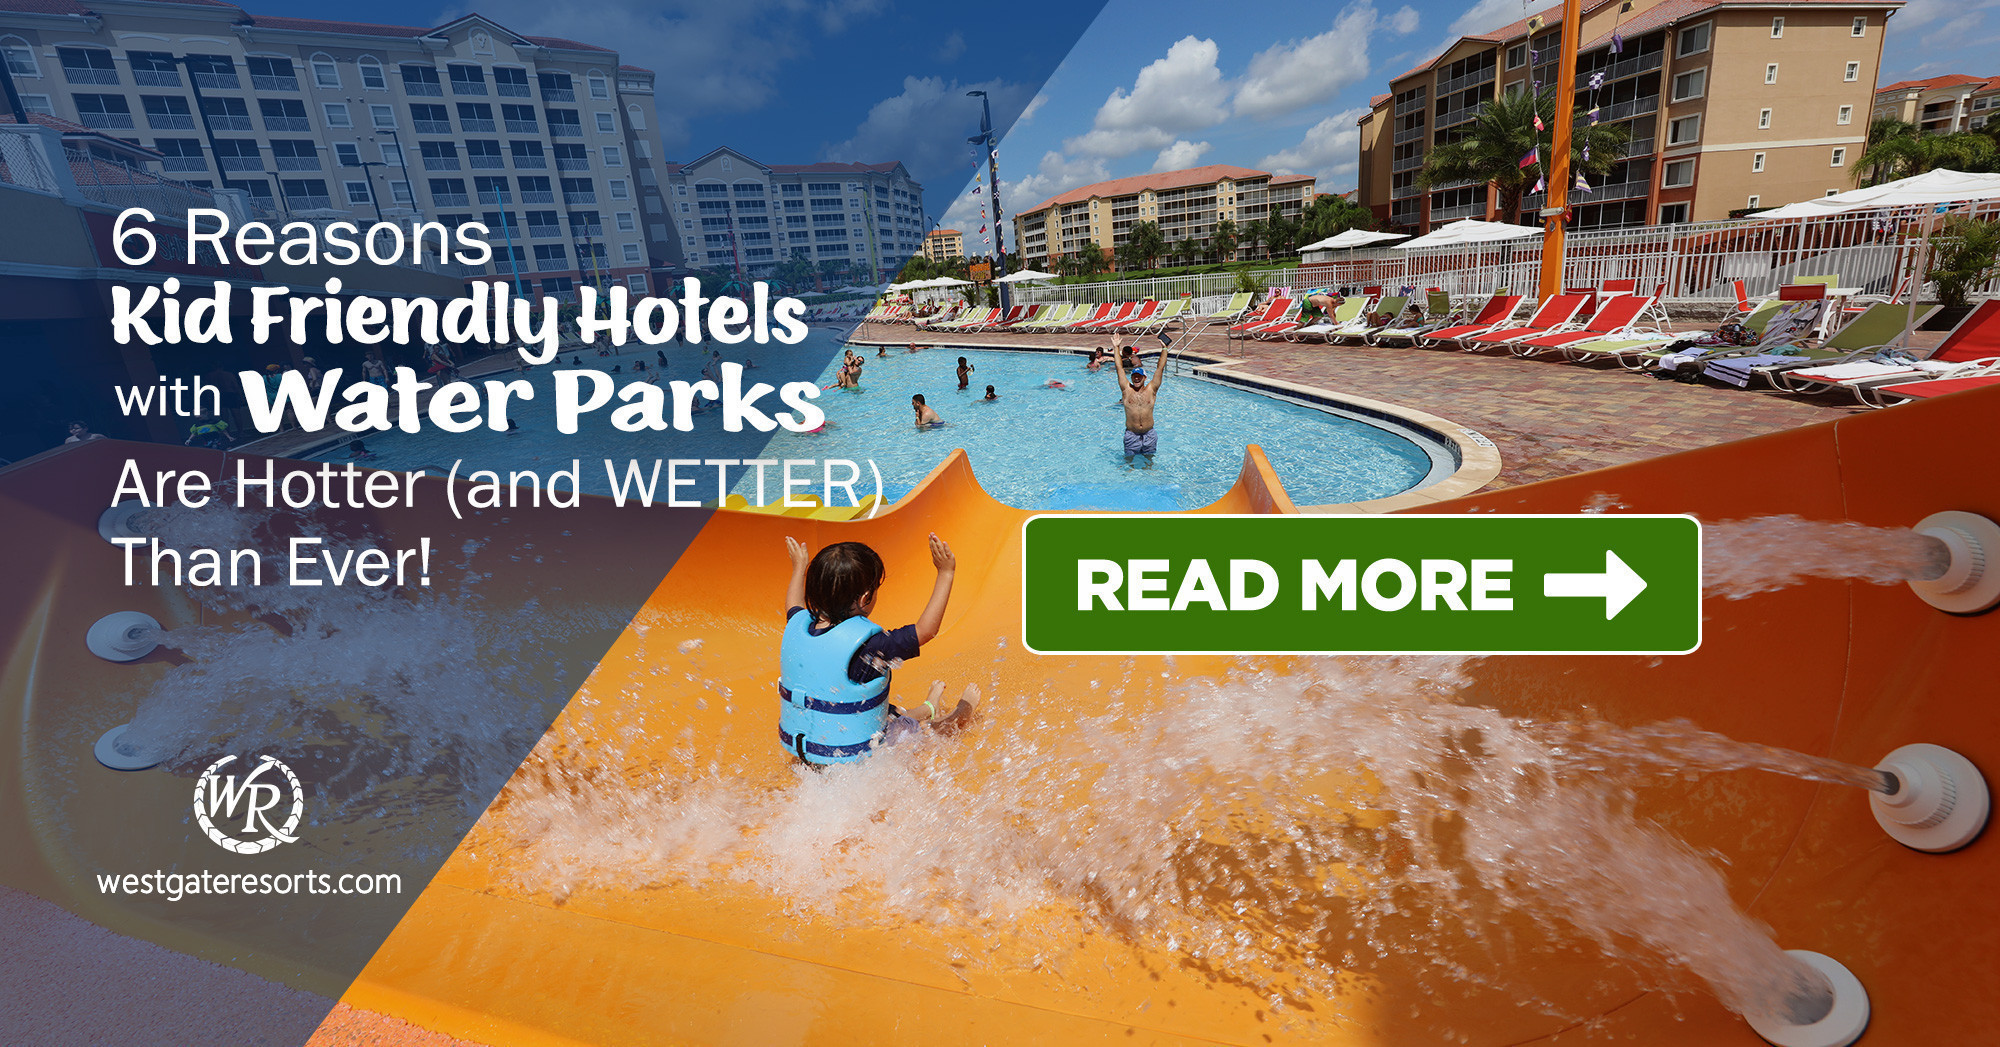 6 Reasons Kid Friendly Hotels with Water Parks Are Hotter (and WETTER) Than Ever!